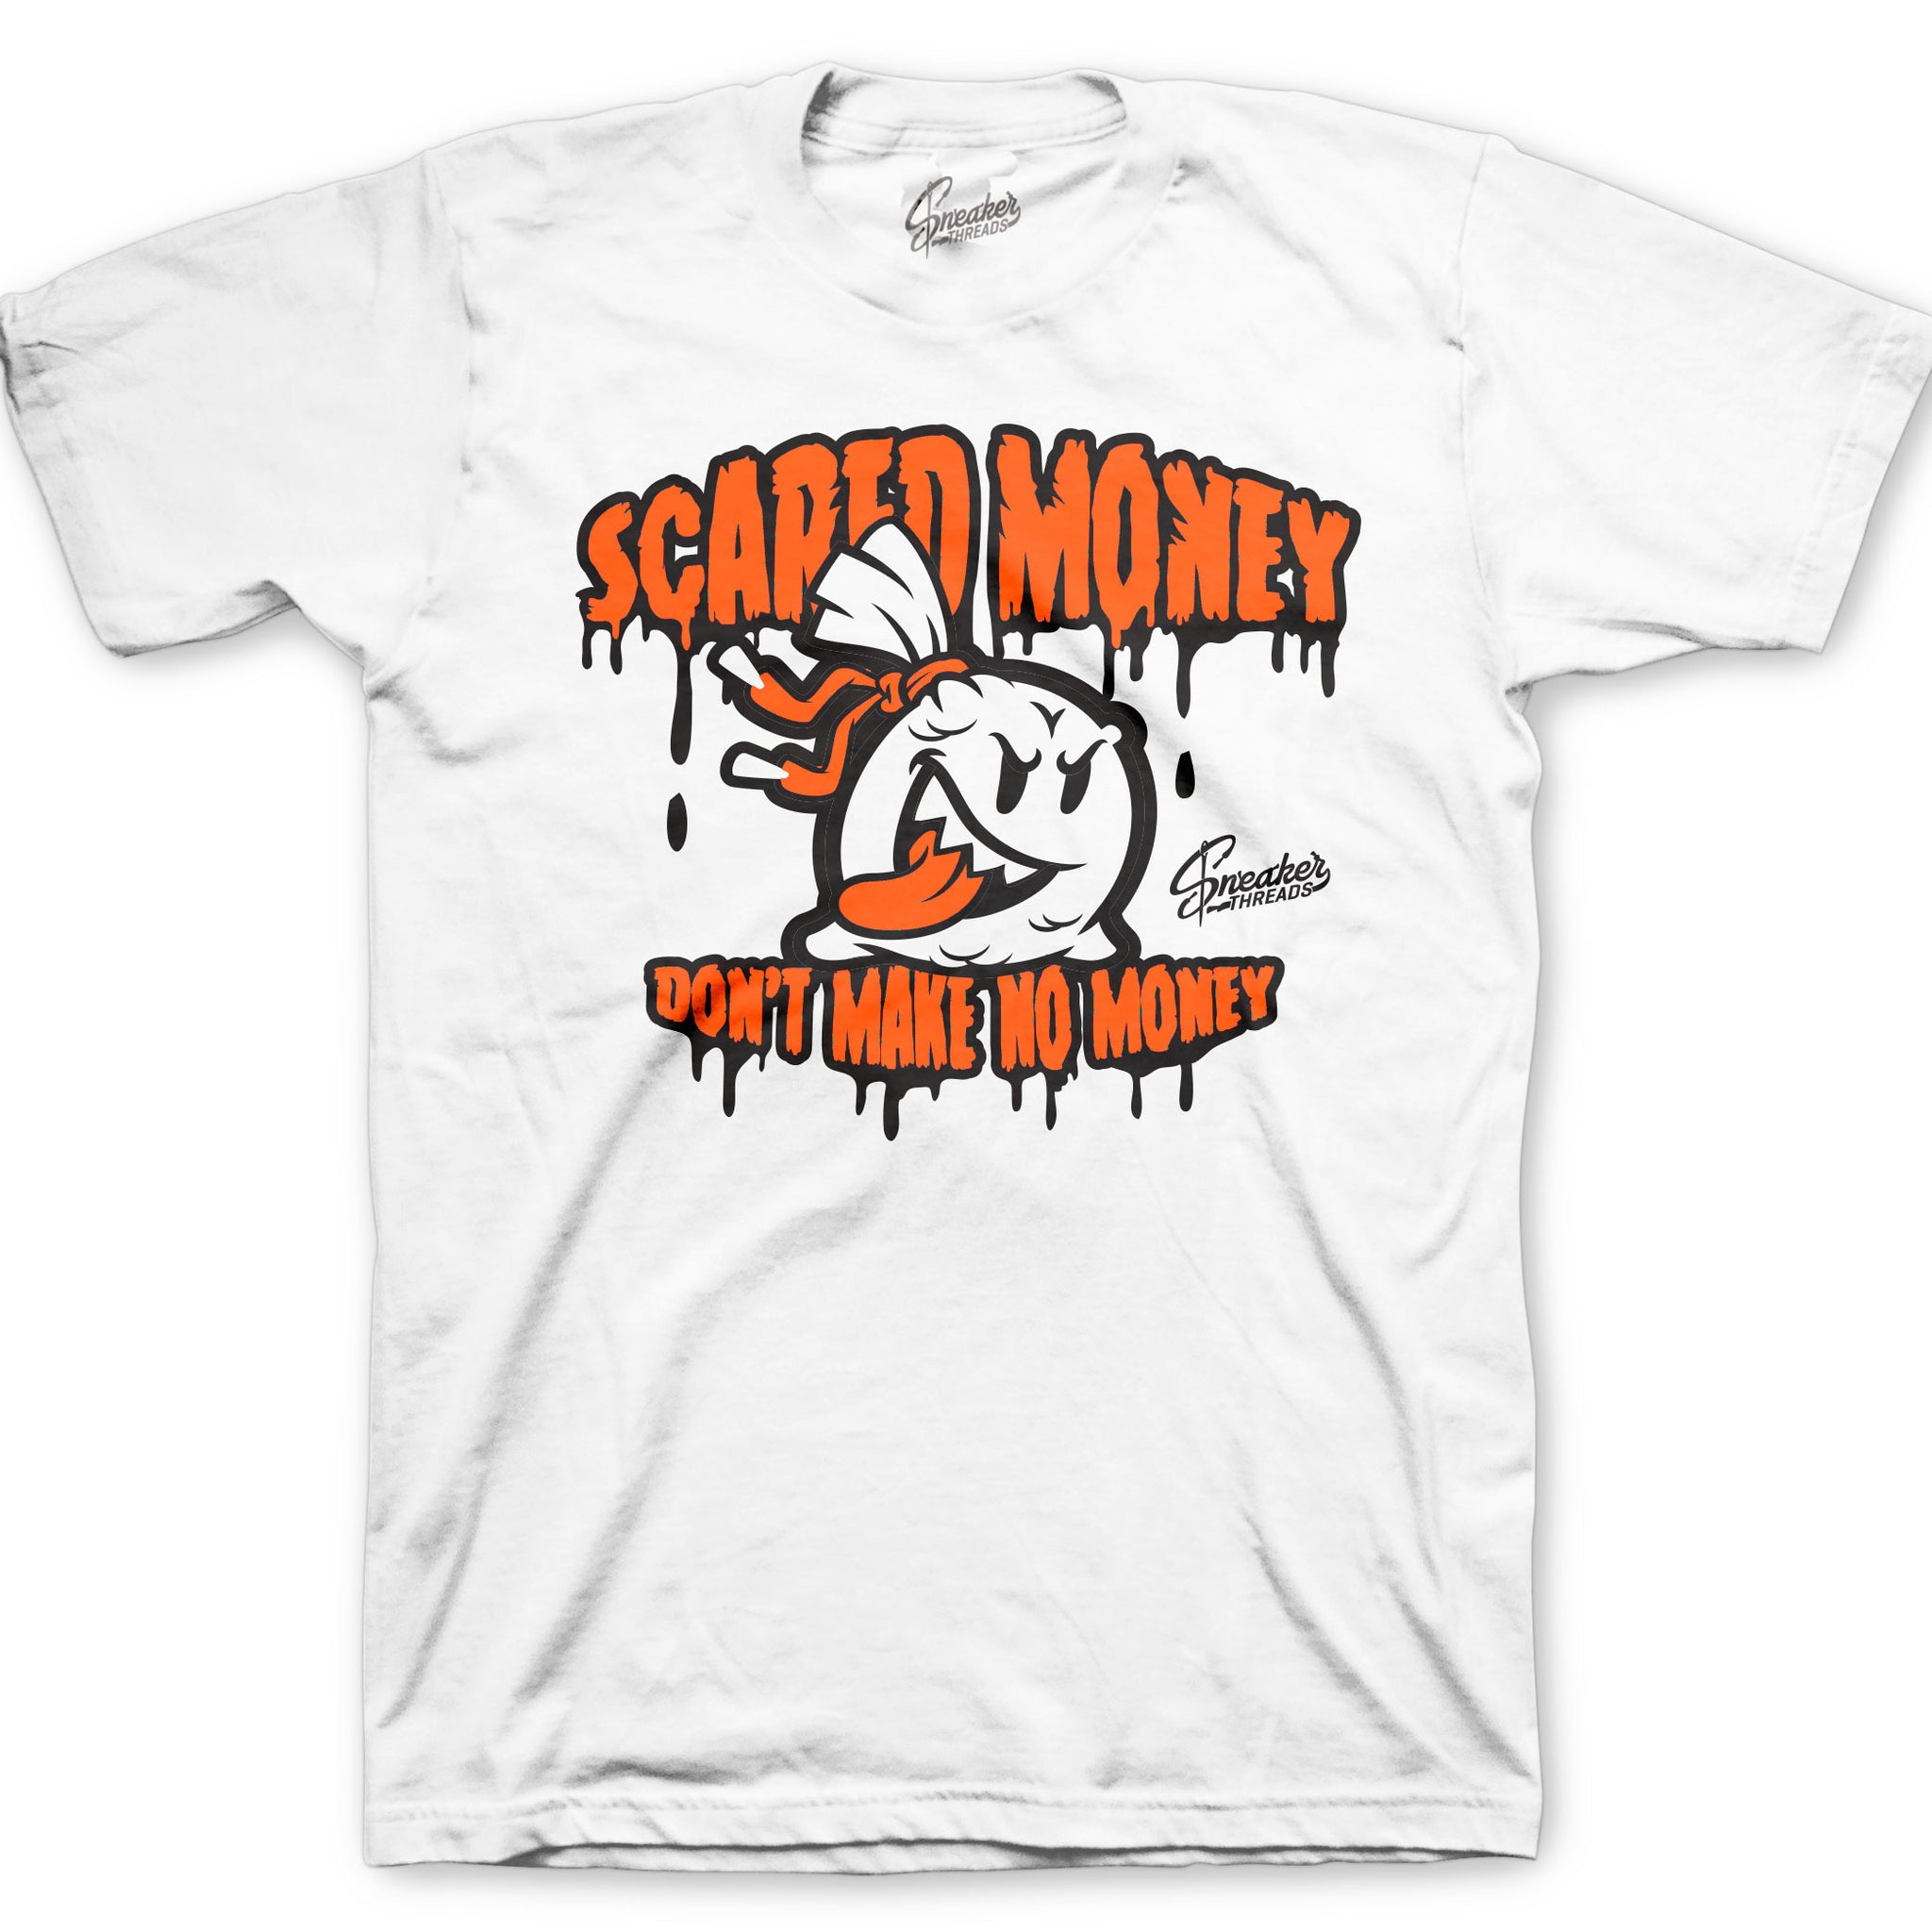 Scared Money shirts to look fresh with Shattered Backboard 1's